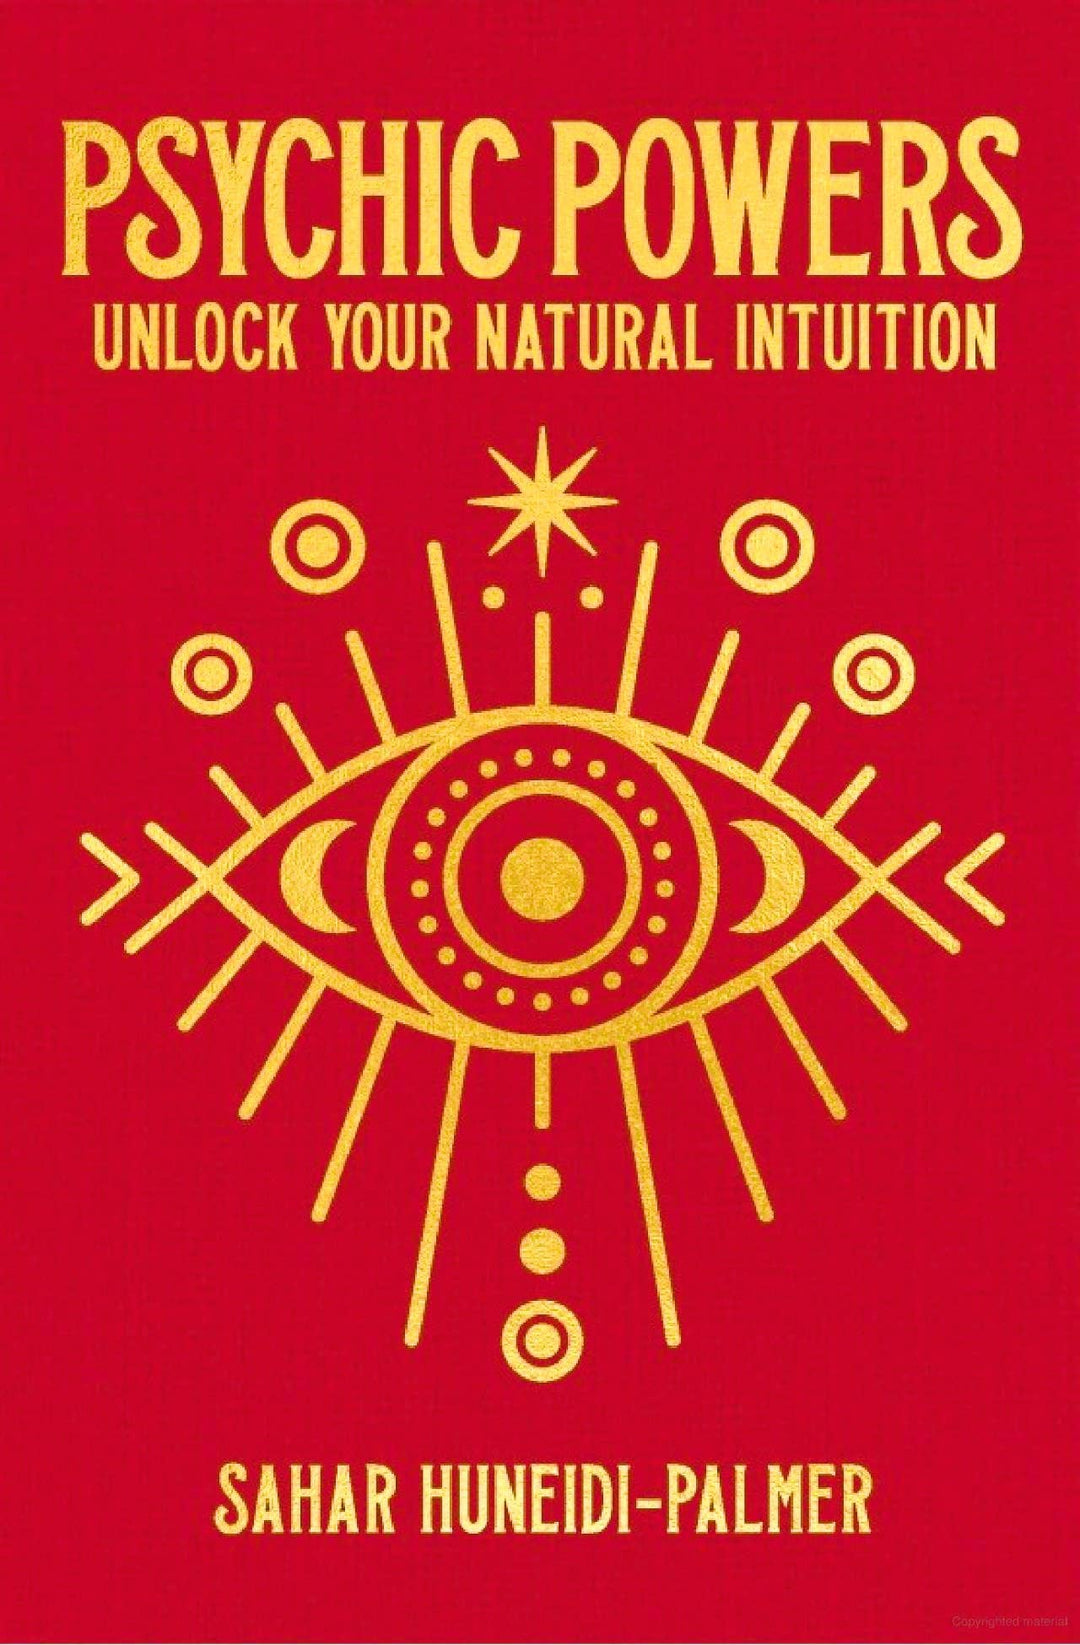 Microcosm Publishing & Distribution - Psychic Powers: Unlock Your Natural Intuition